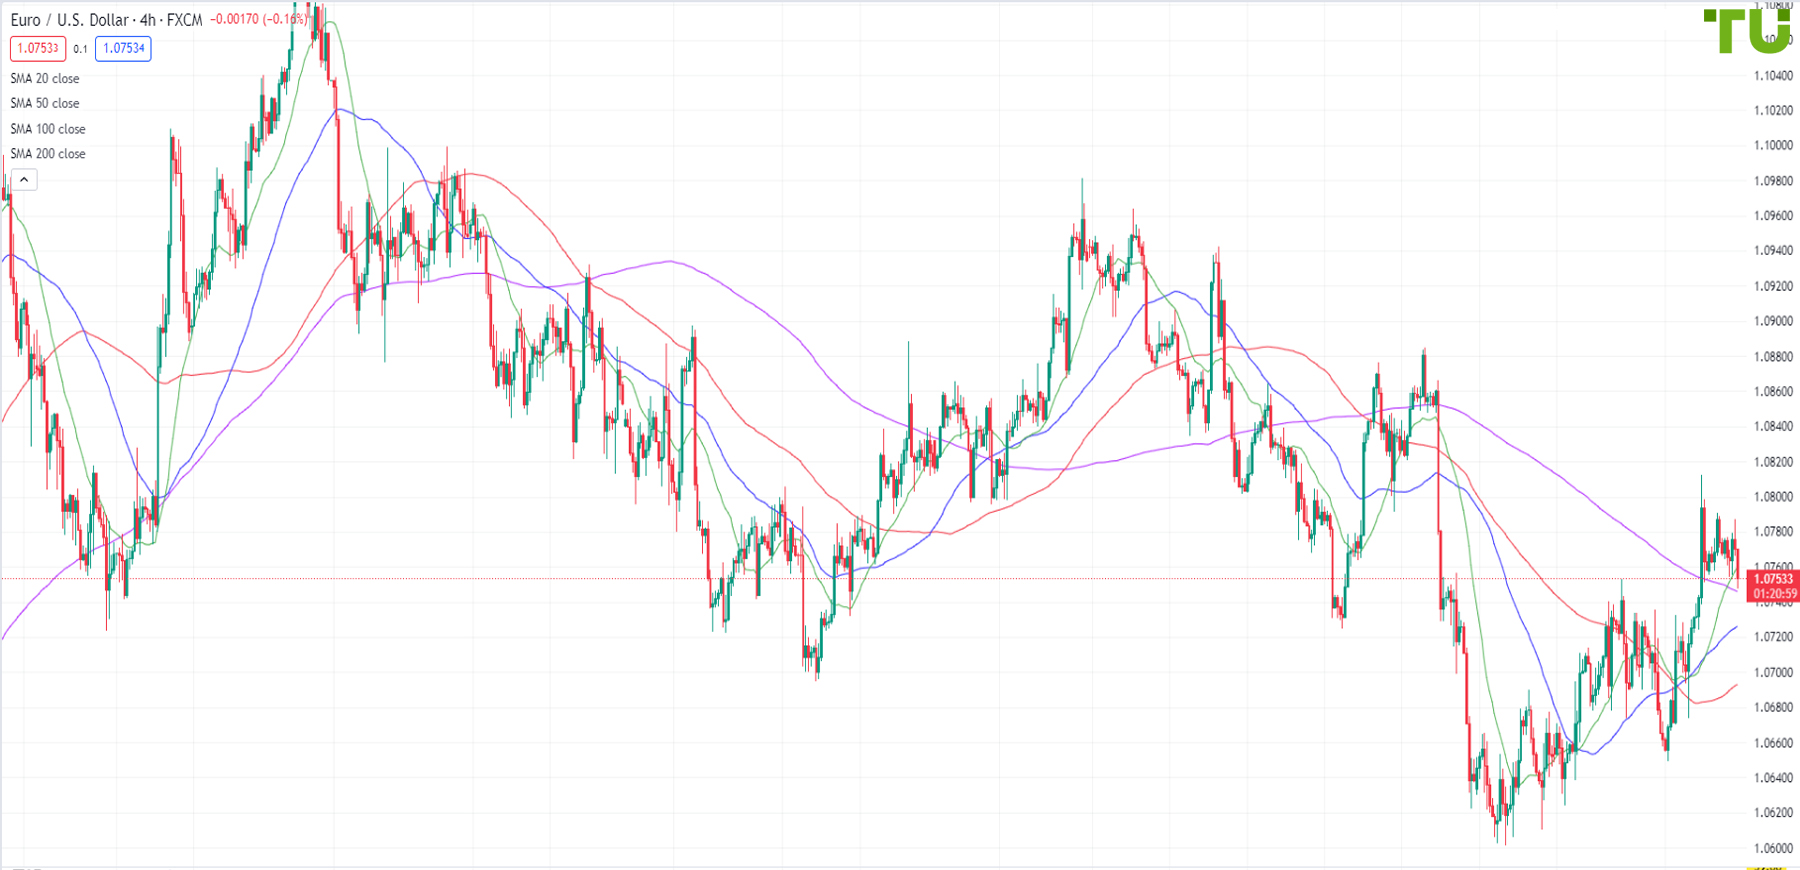 EUR/USD retreats from resistance